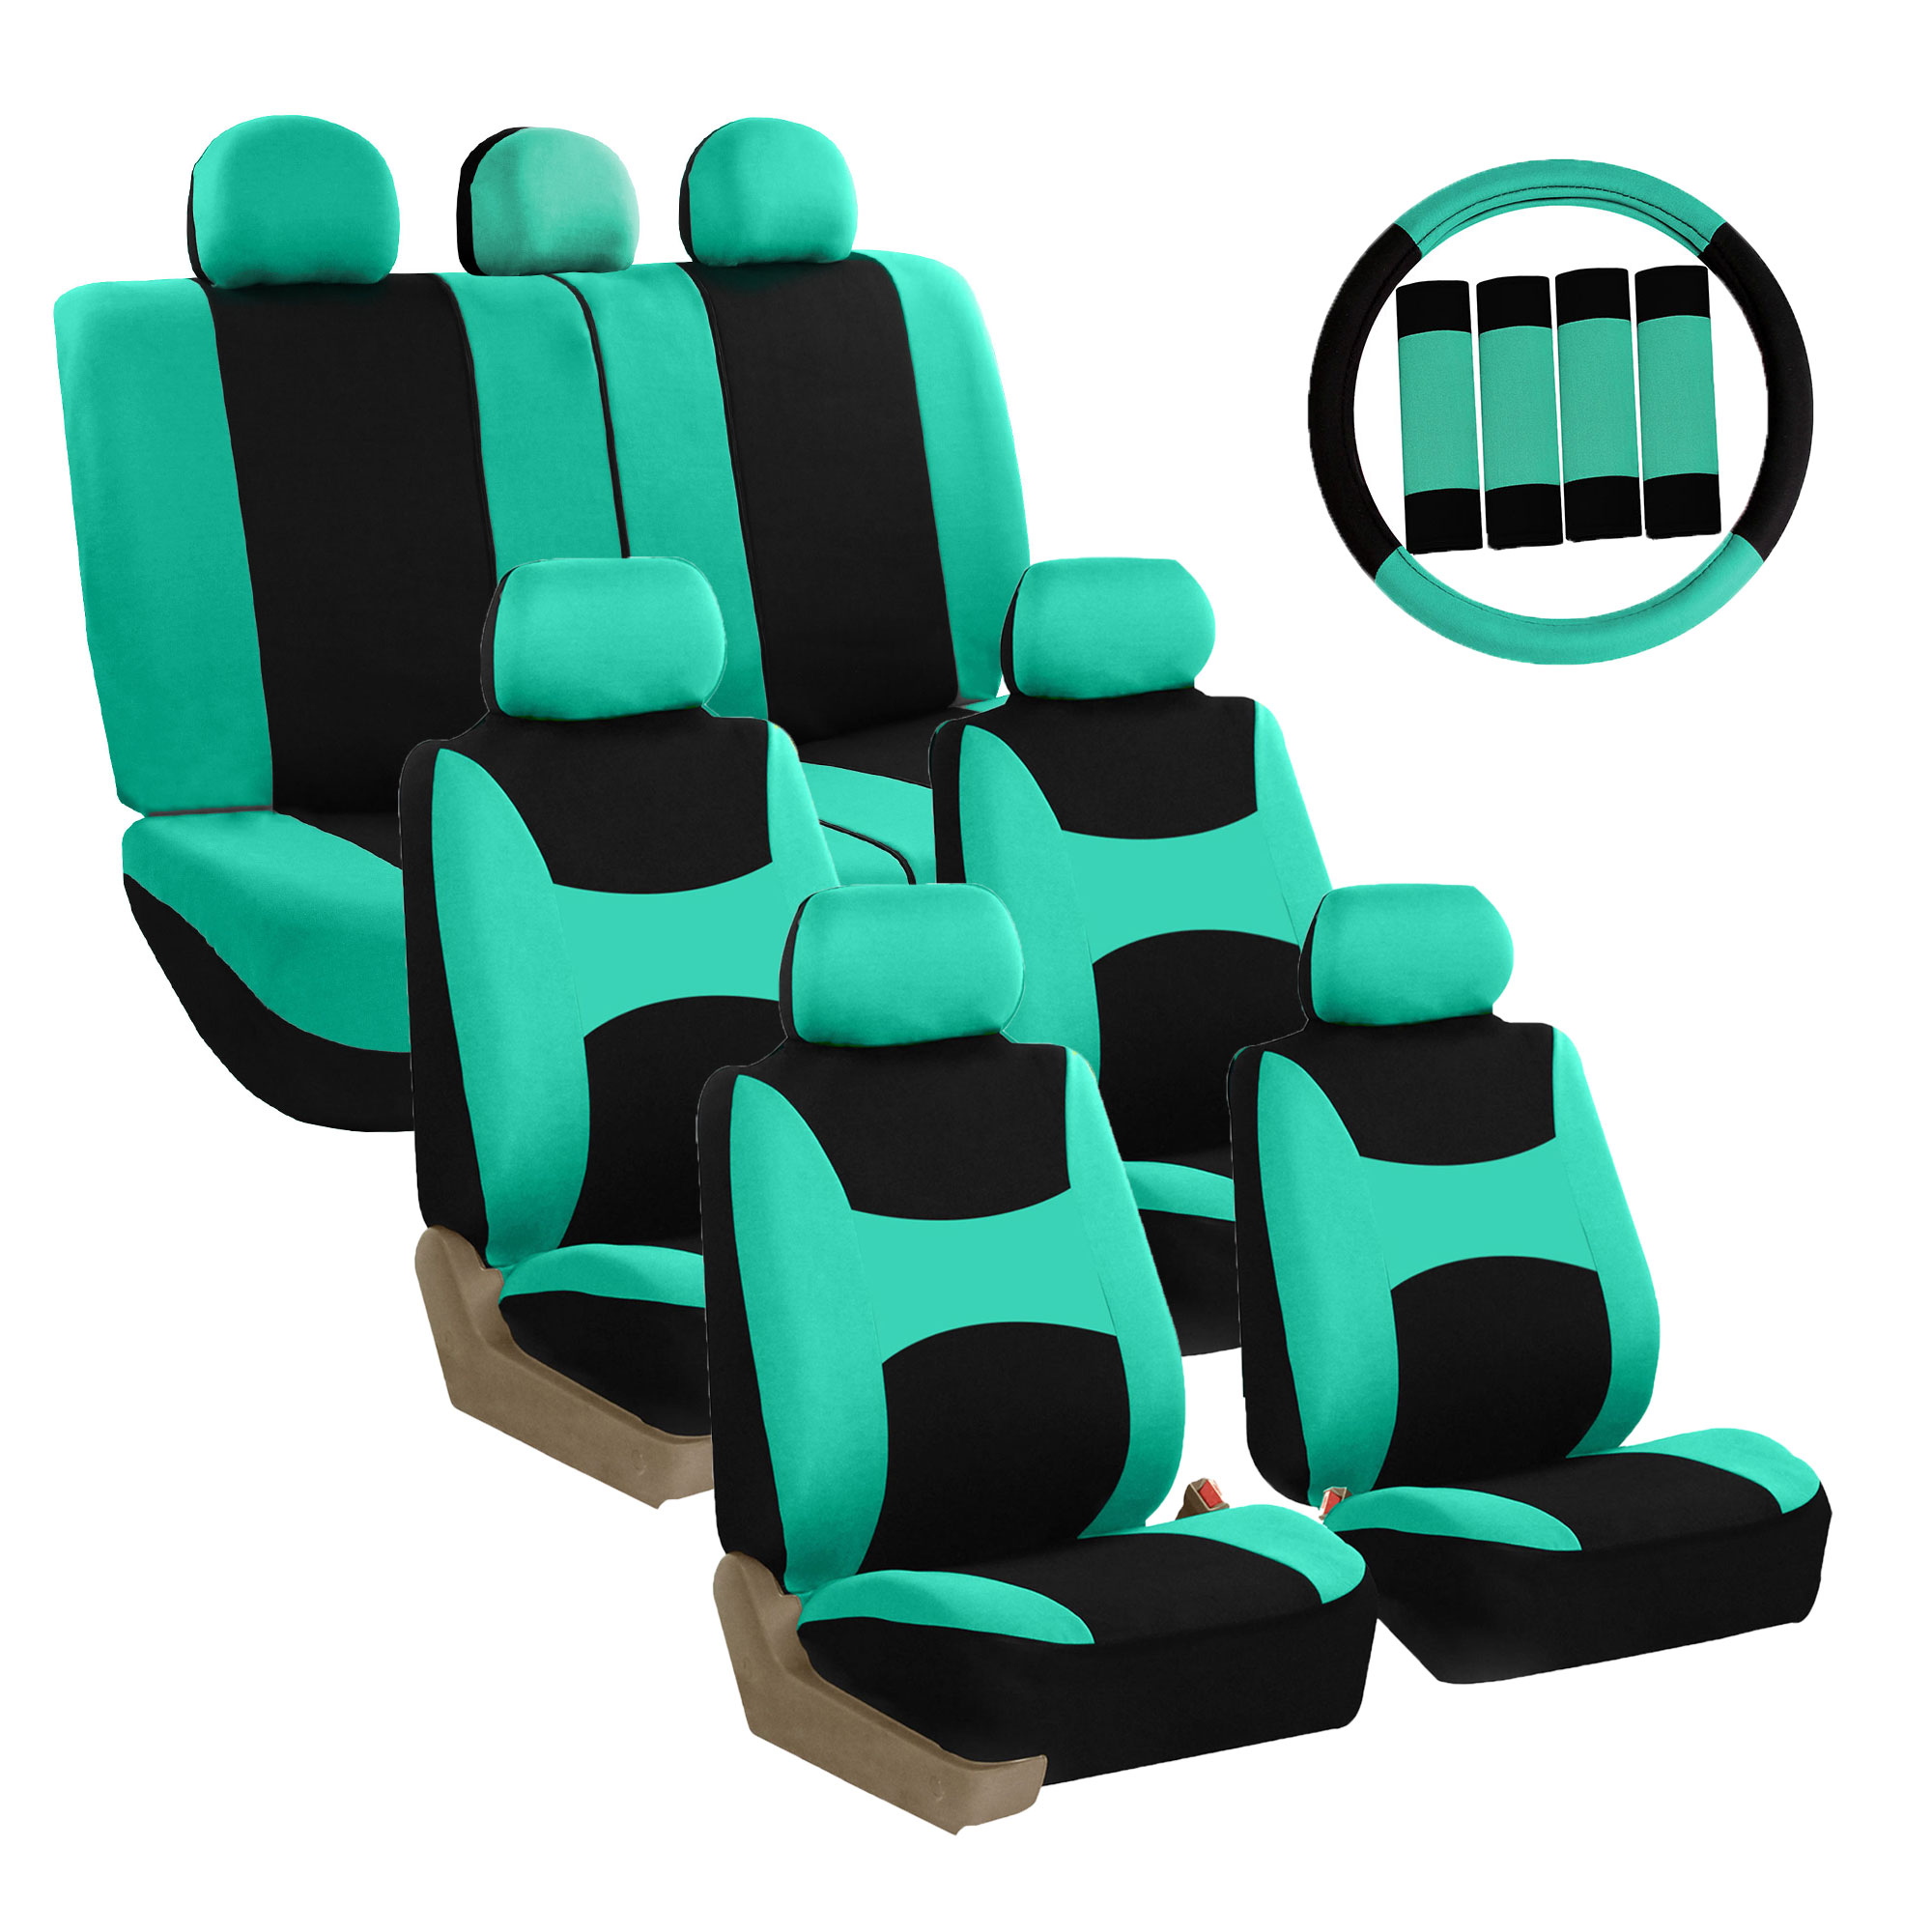 FH Group 3 rows Cloth Car Seat Covers for SUV, Sedan, Van Full Set - Universal Fit Automotive Seat Covers, Split Bench Rear Seat with Steering Wheel Cover, 4 Seatbelt Pads FB030217MINT-COMBO - image 1 of 7